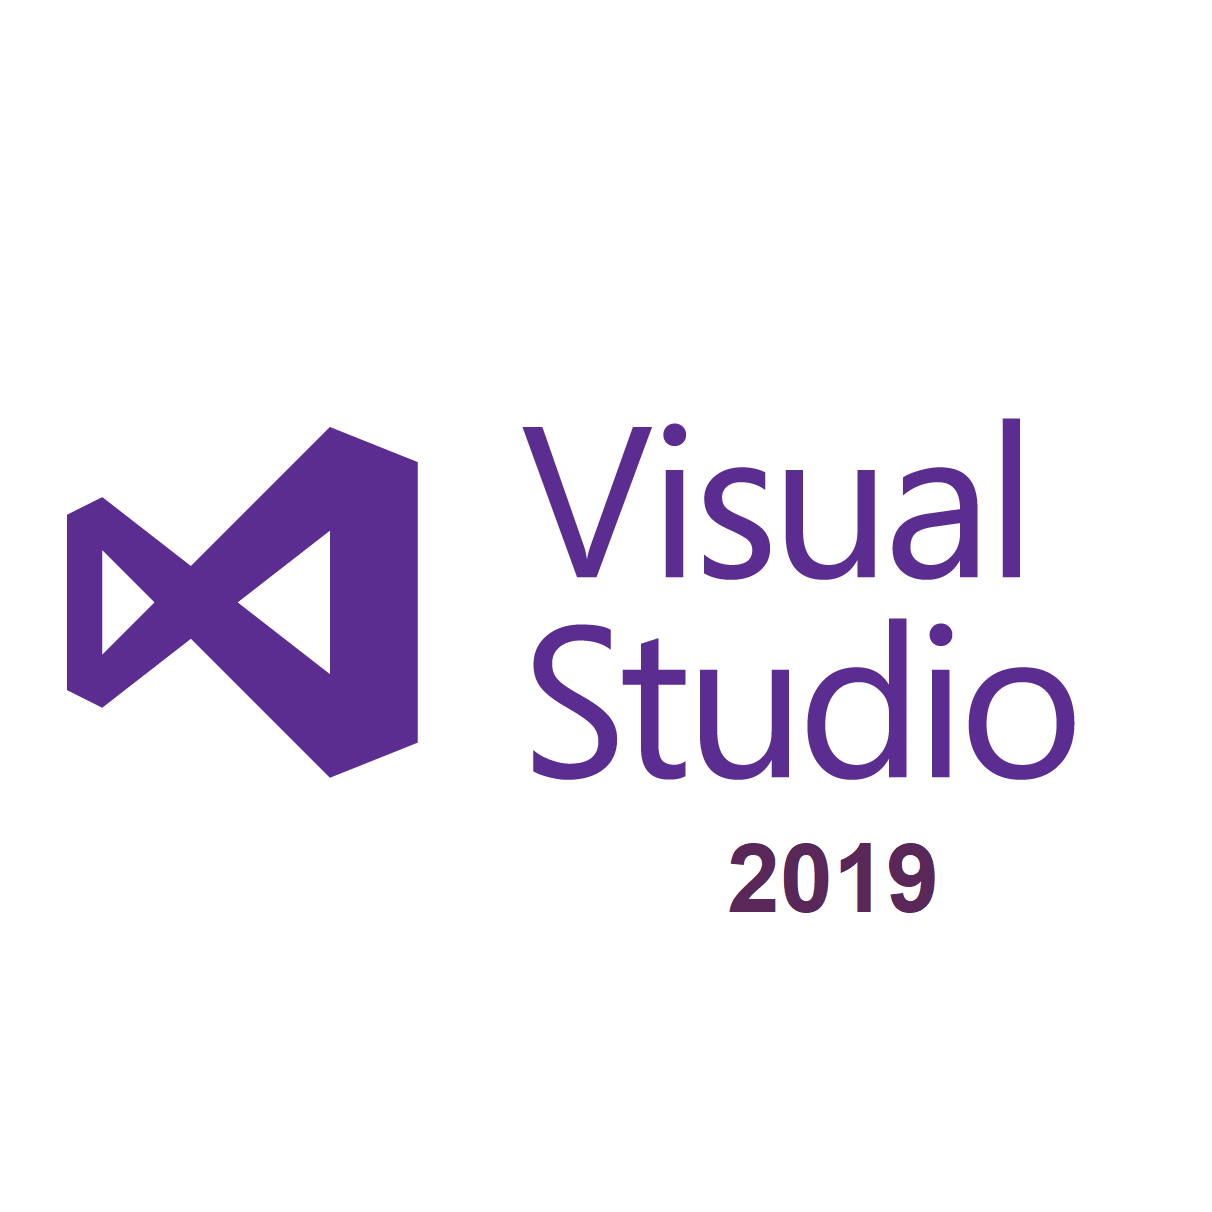 Visual Studio Code download the new version for android